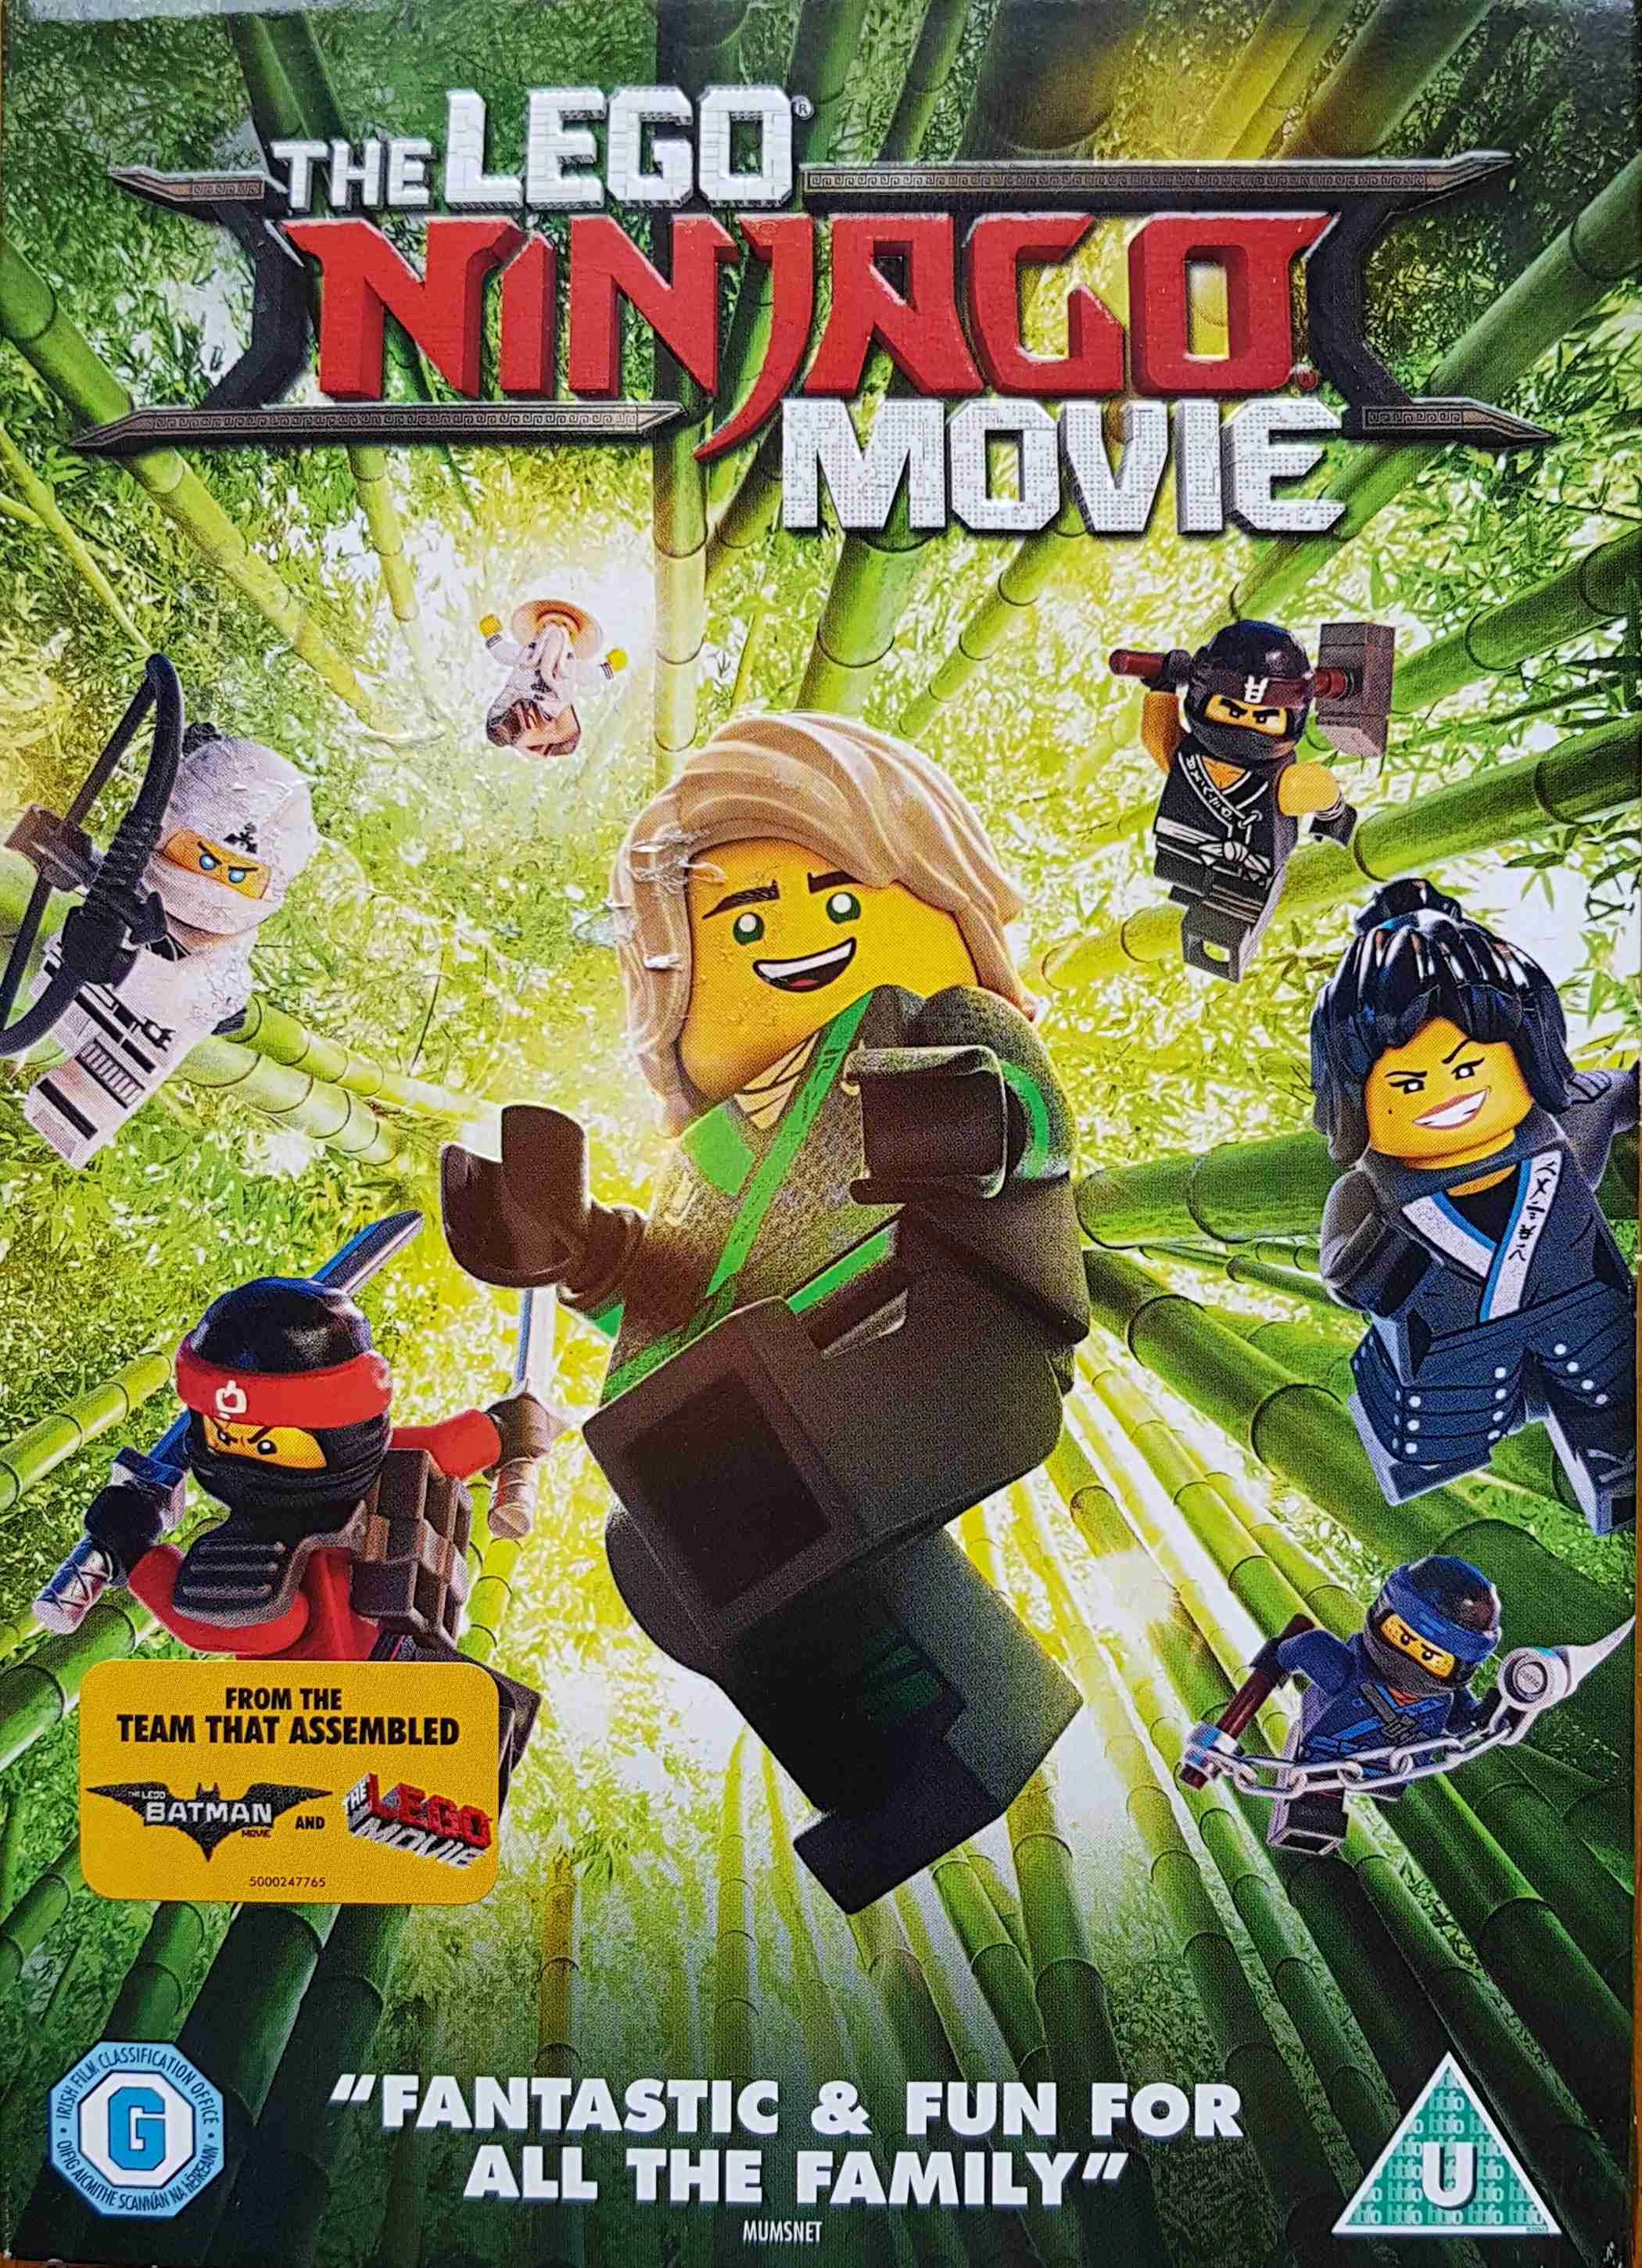 Picture of The Lego Ninjago movie by artist Hilary Winston / Bob Logan / Paul Fisher / William Wheeler / Tom Wheeler / Dan Hageman / Kevin Hageman from ITV, Channel 4 and Channel 5 dvds library